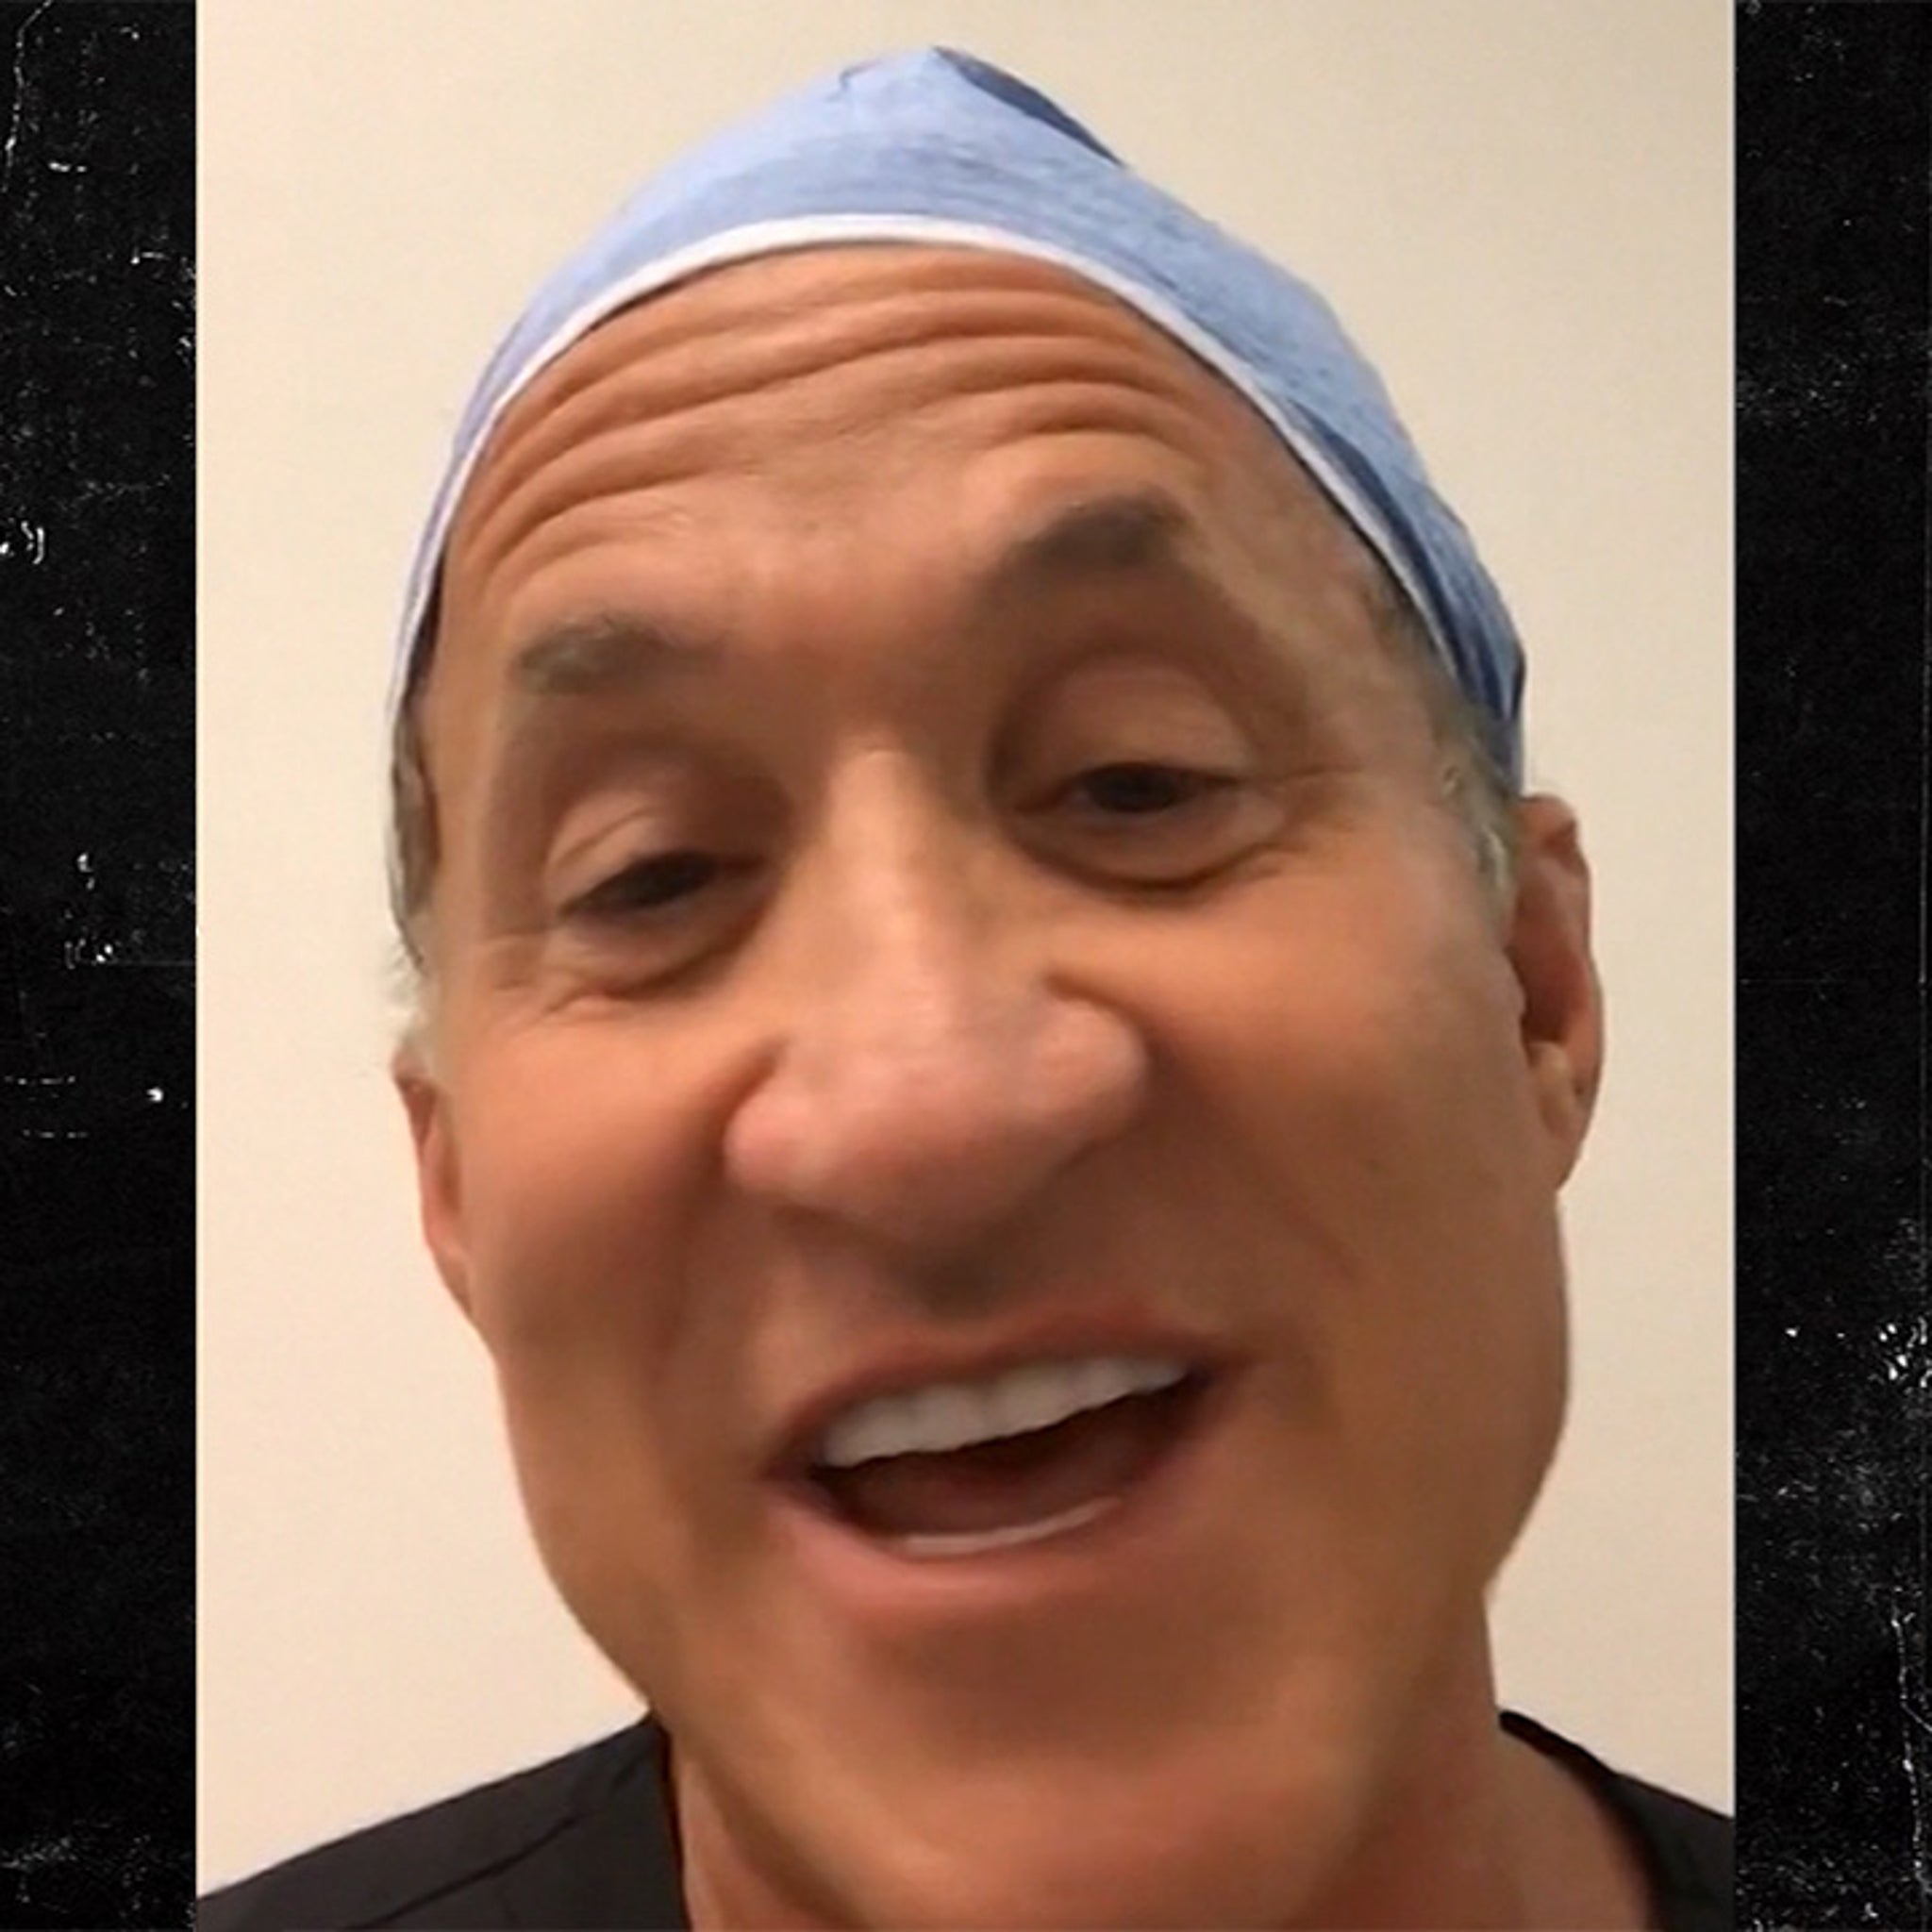 Botched' Doctor Terry Dubrow on Bieber Wannabes, Uniboobs and